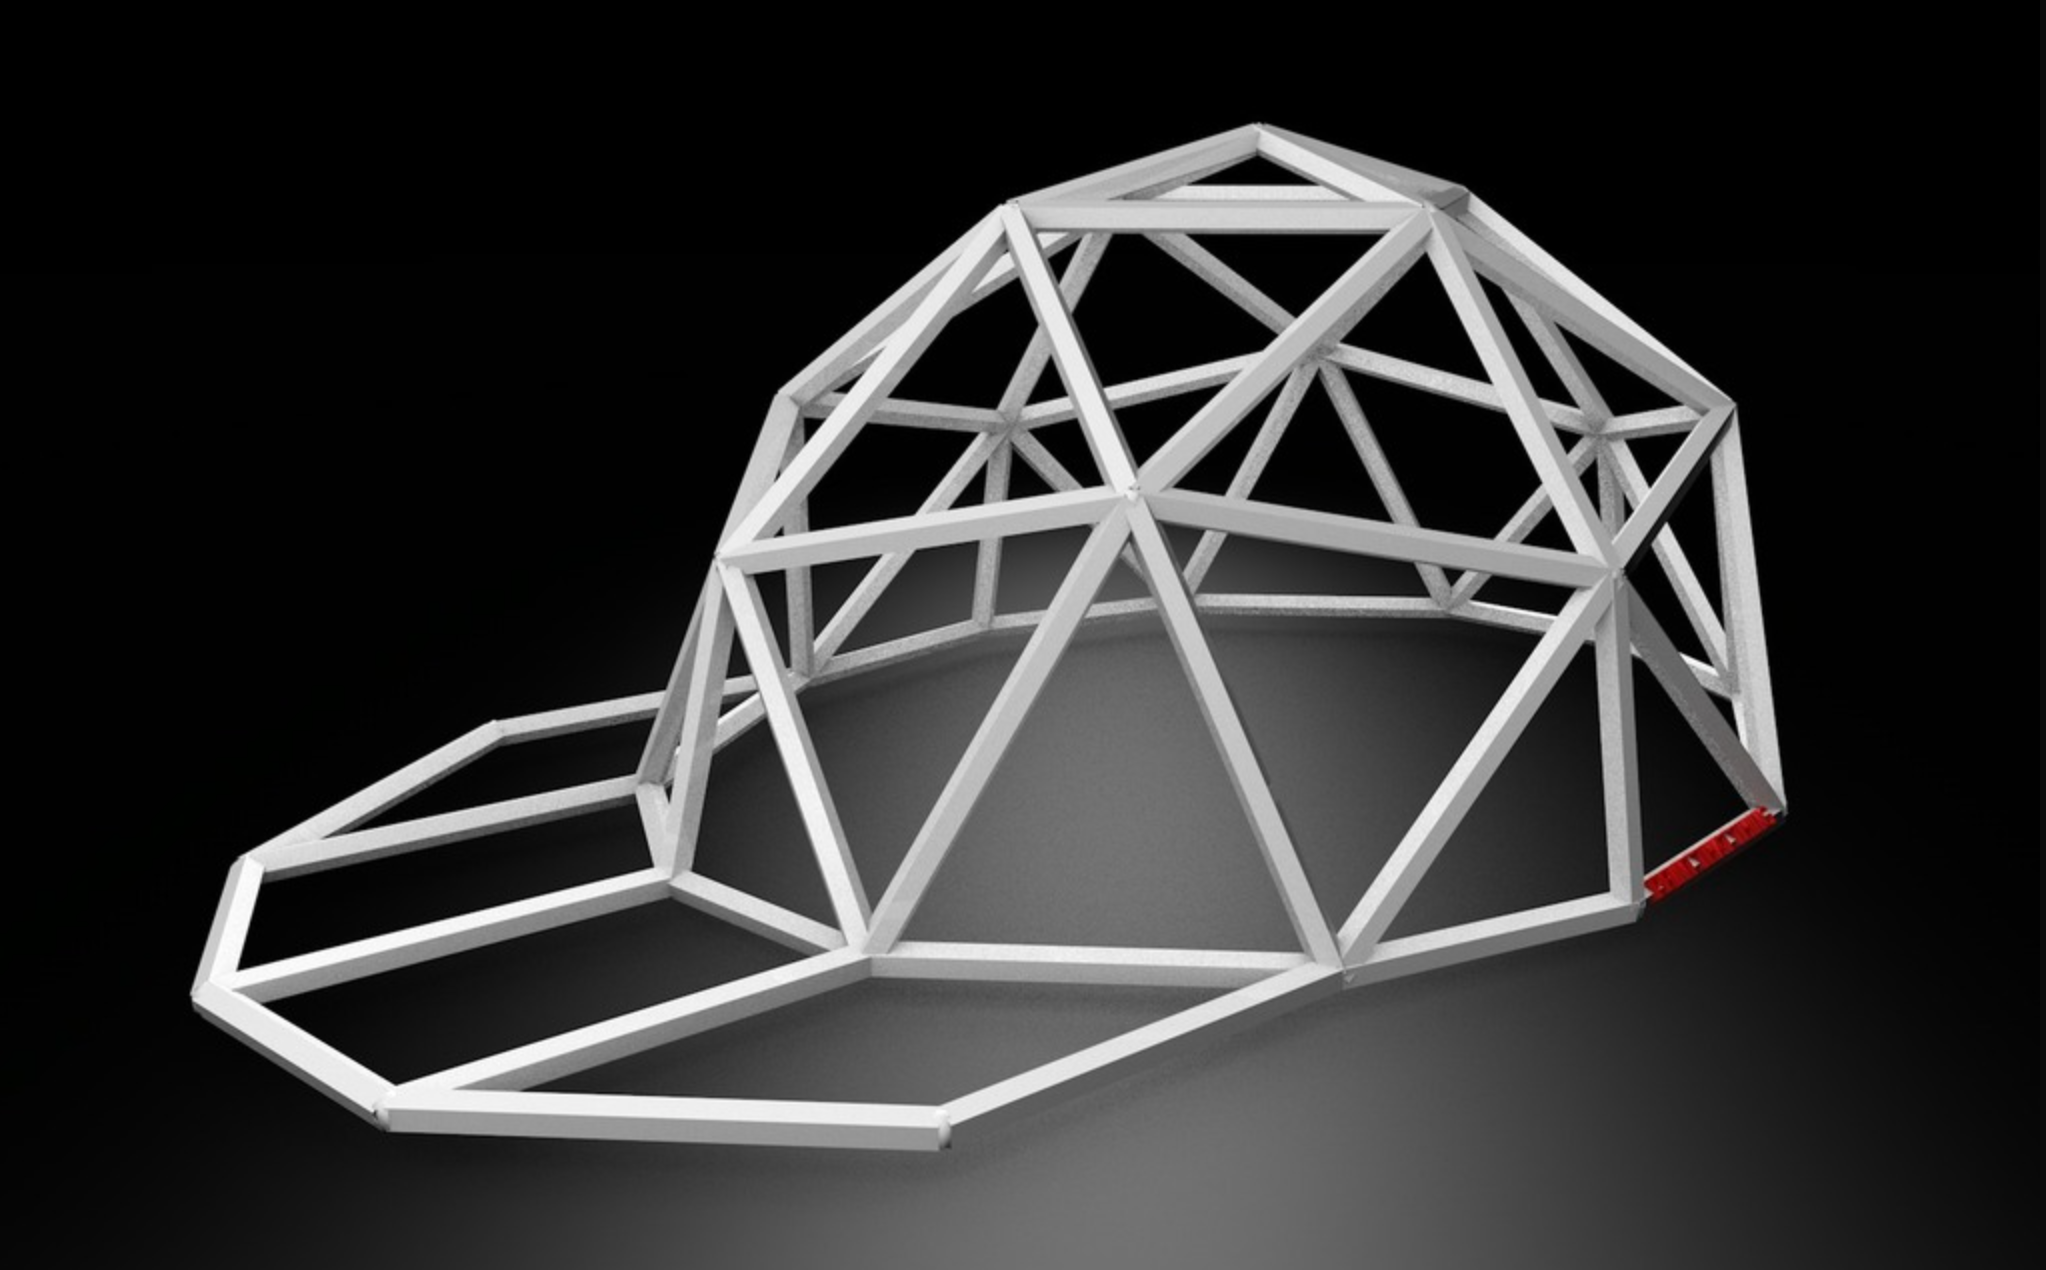 Screen_Shot_2015-04-28_at_11.31.33_AM.png Download STL file HAT • Design to 3D print, PrintThatThing